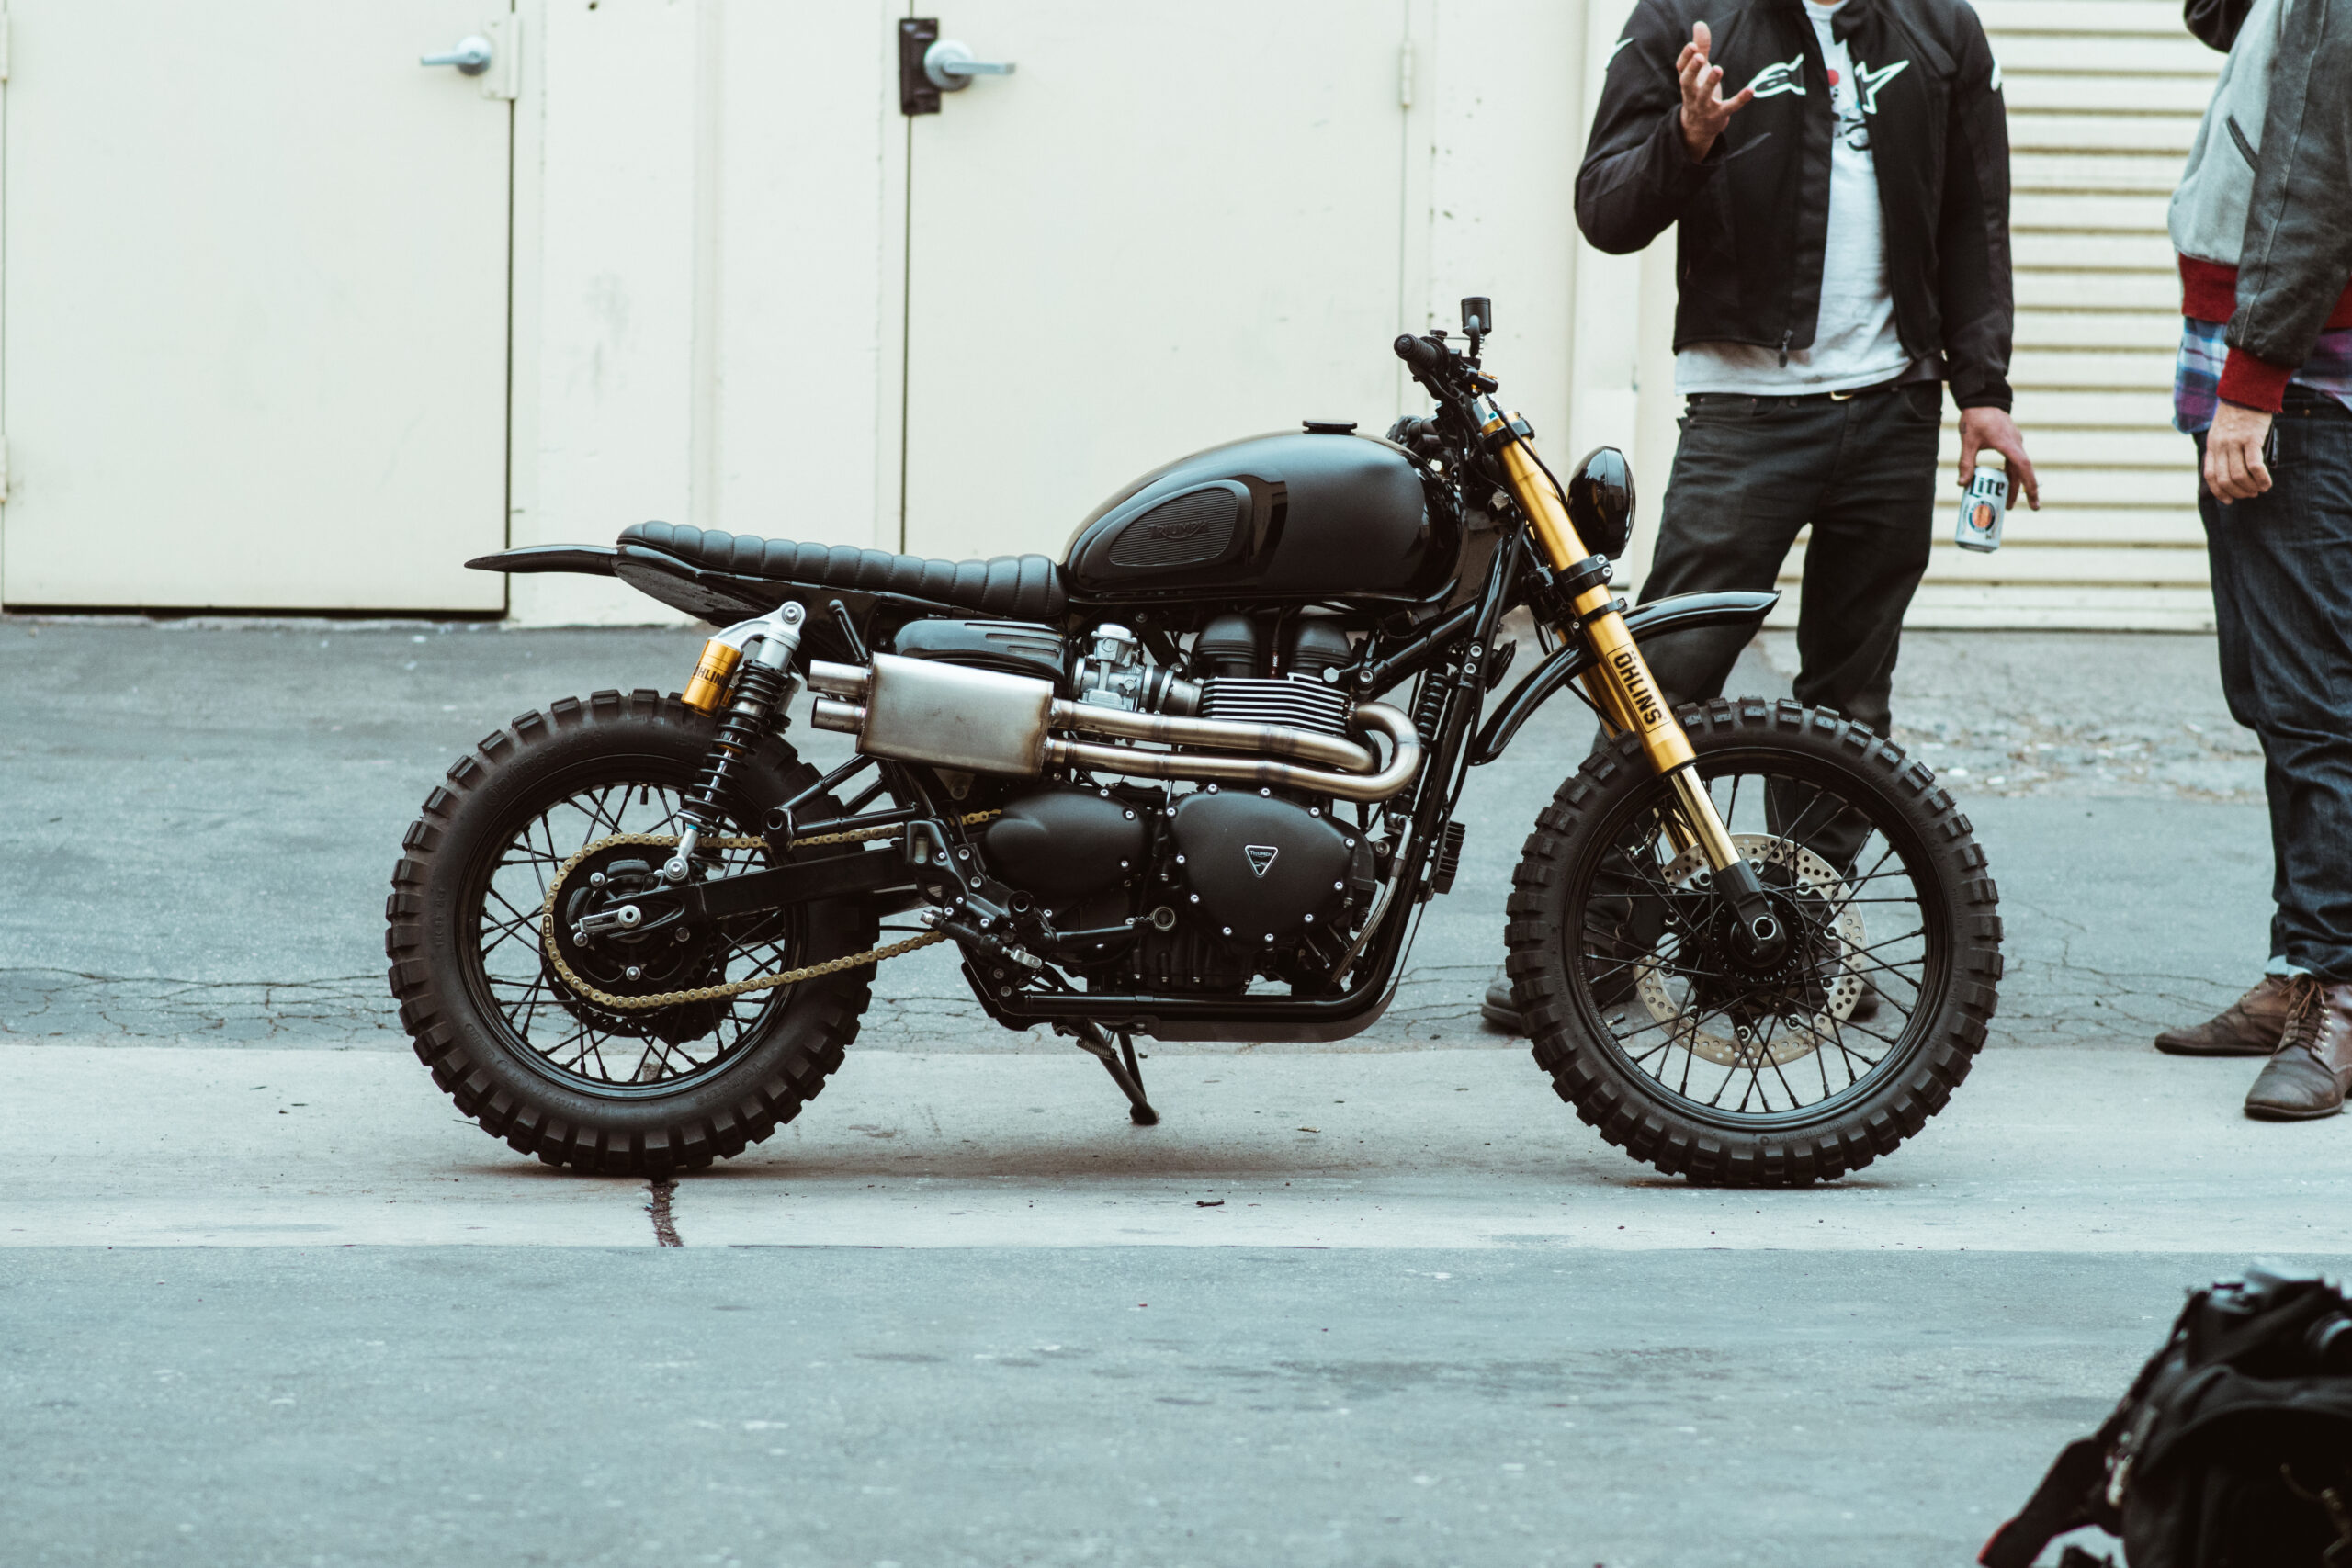 Rugged and Raw: A Triumph Scrambler by Seaweed and Gravel